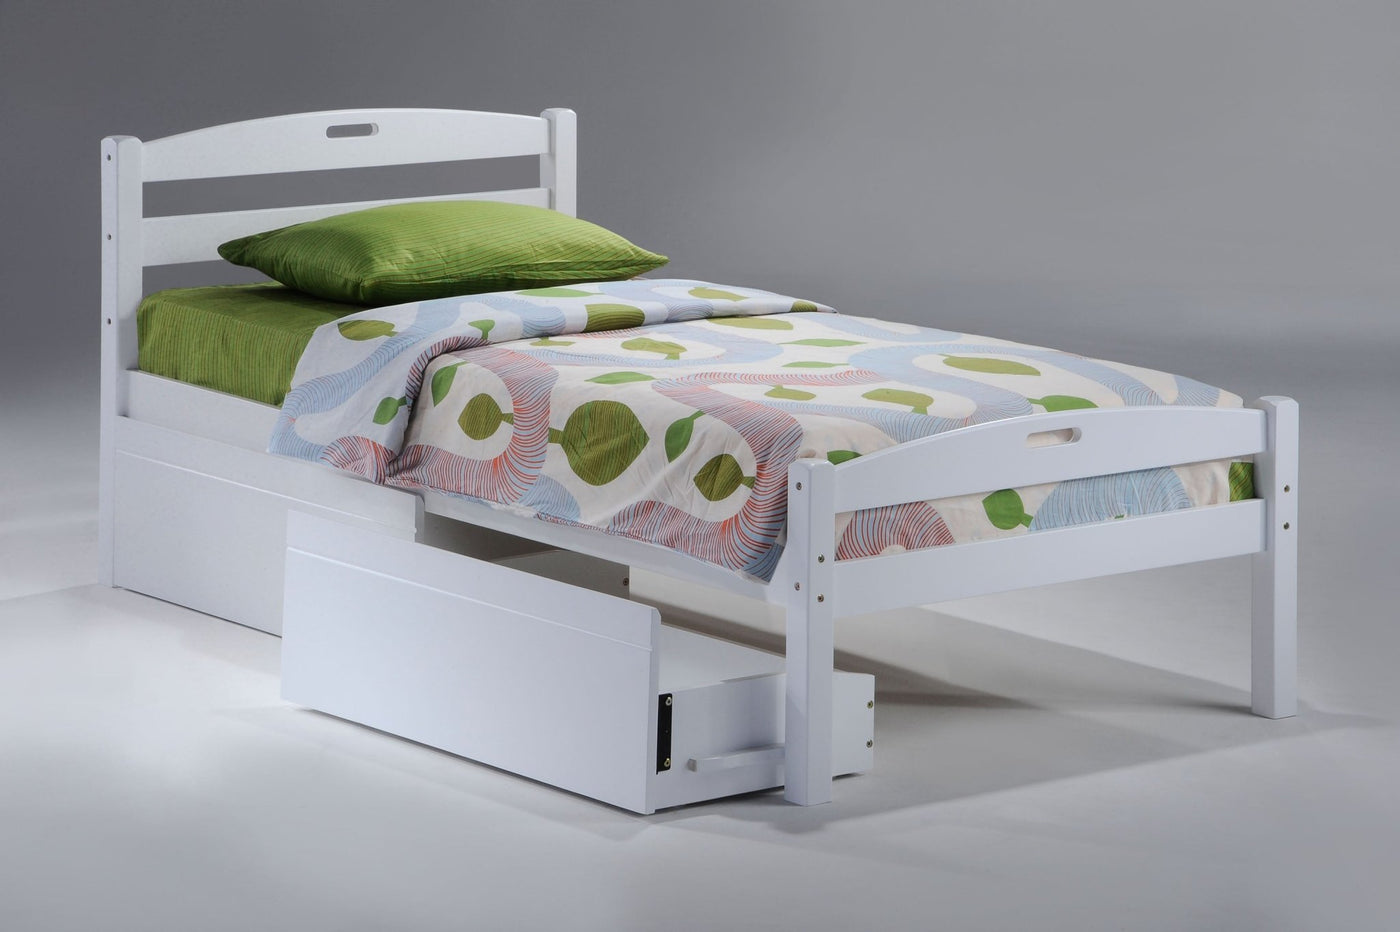 Sesame Bed (Twin or Full)